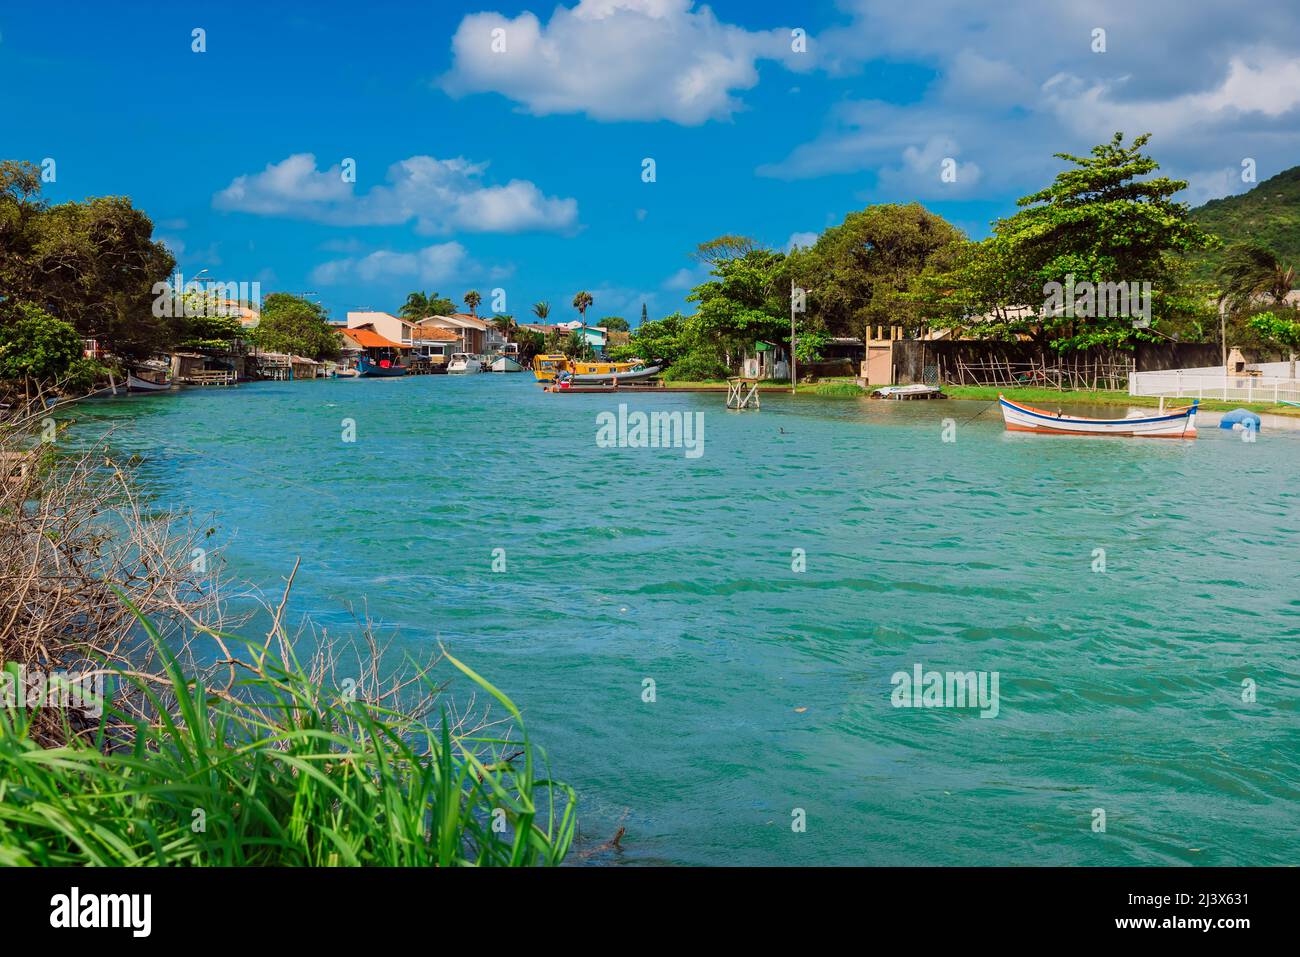 January 6, 2022. Florianopolis, Brazil. Canal of Barra da Lagoa with blue water, boats and houses Stock Photo